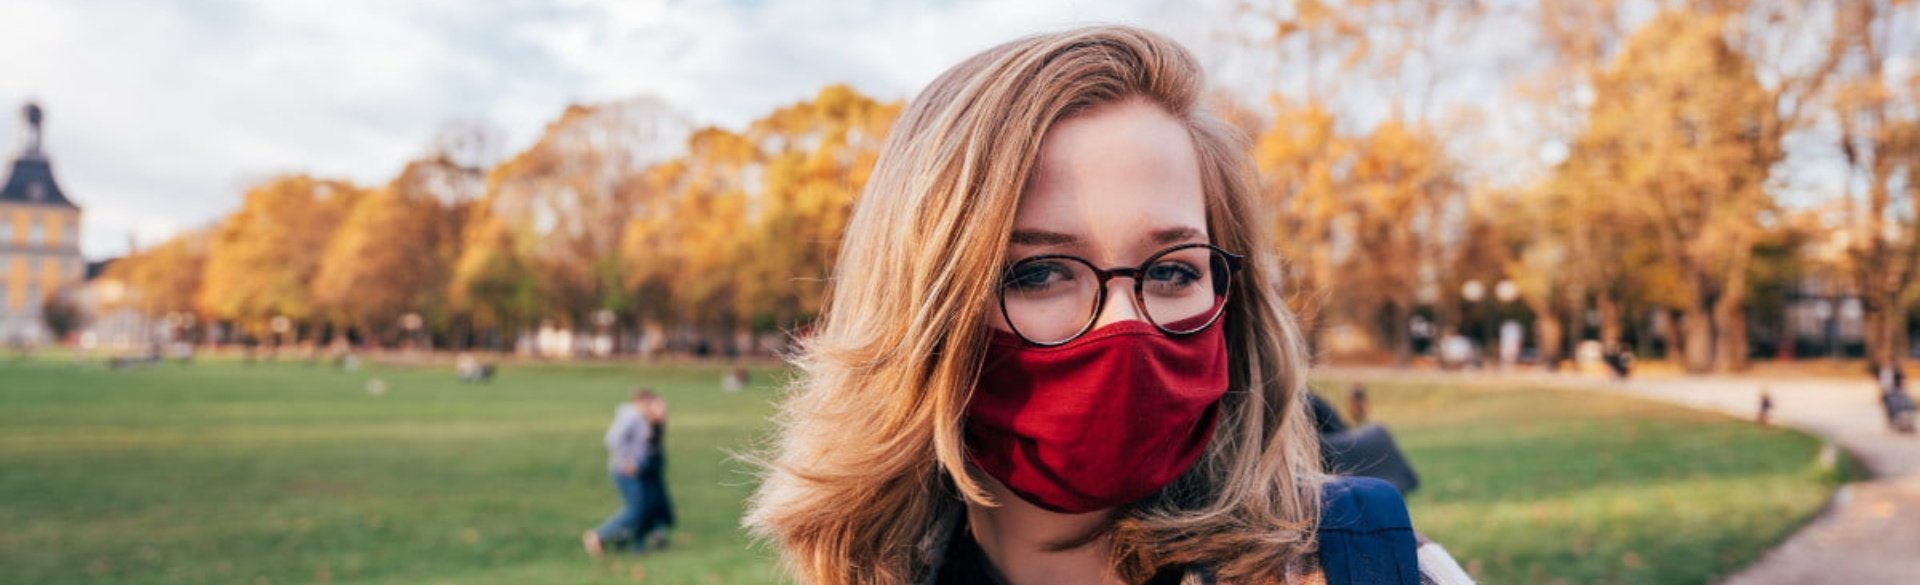 Woman smiling in face mask